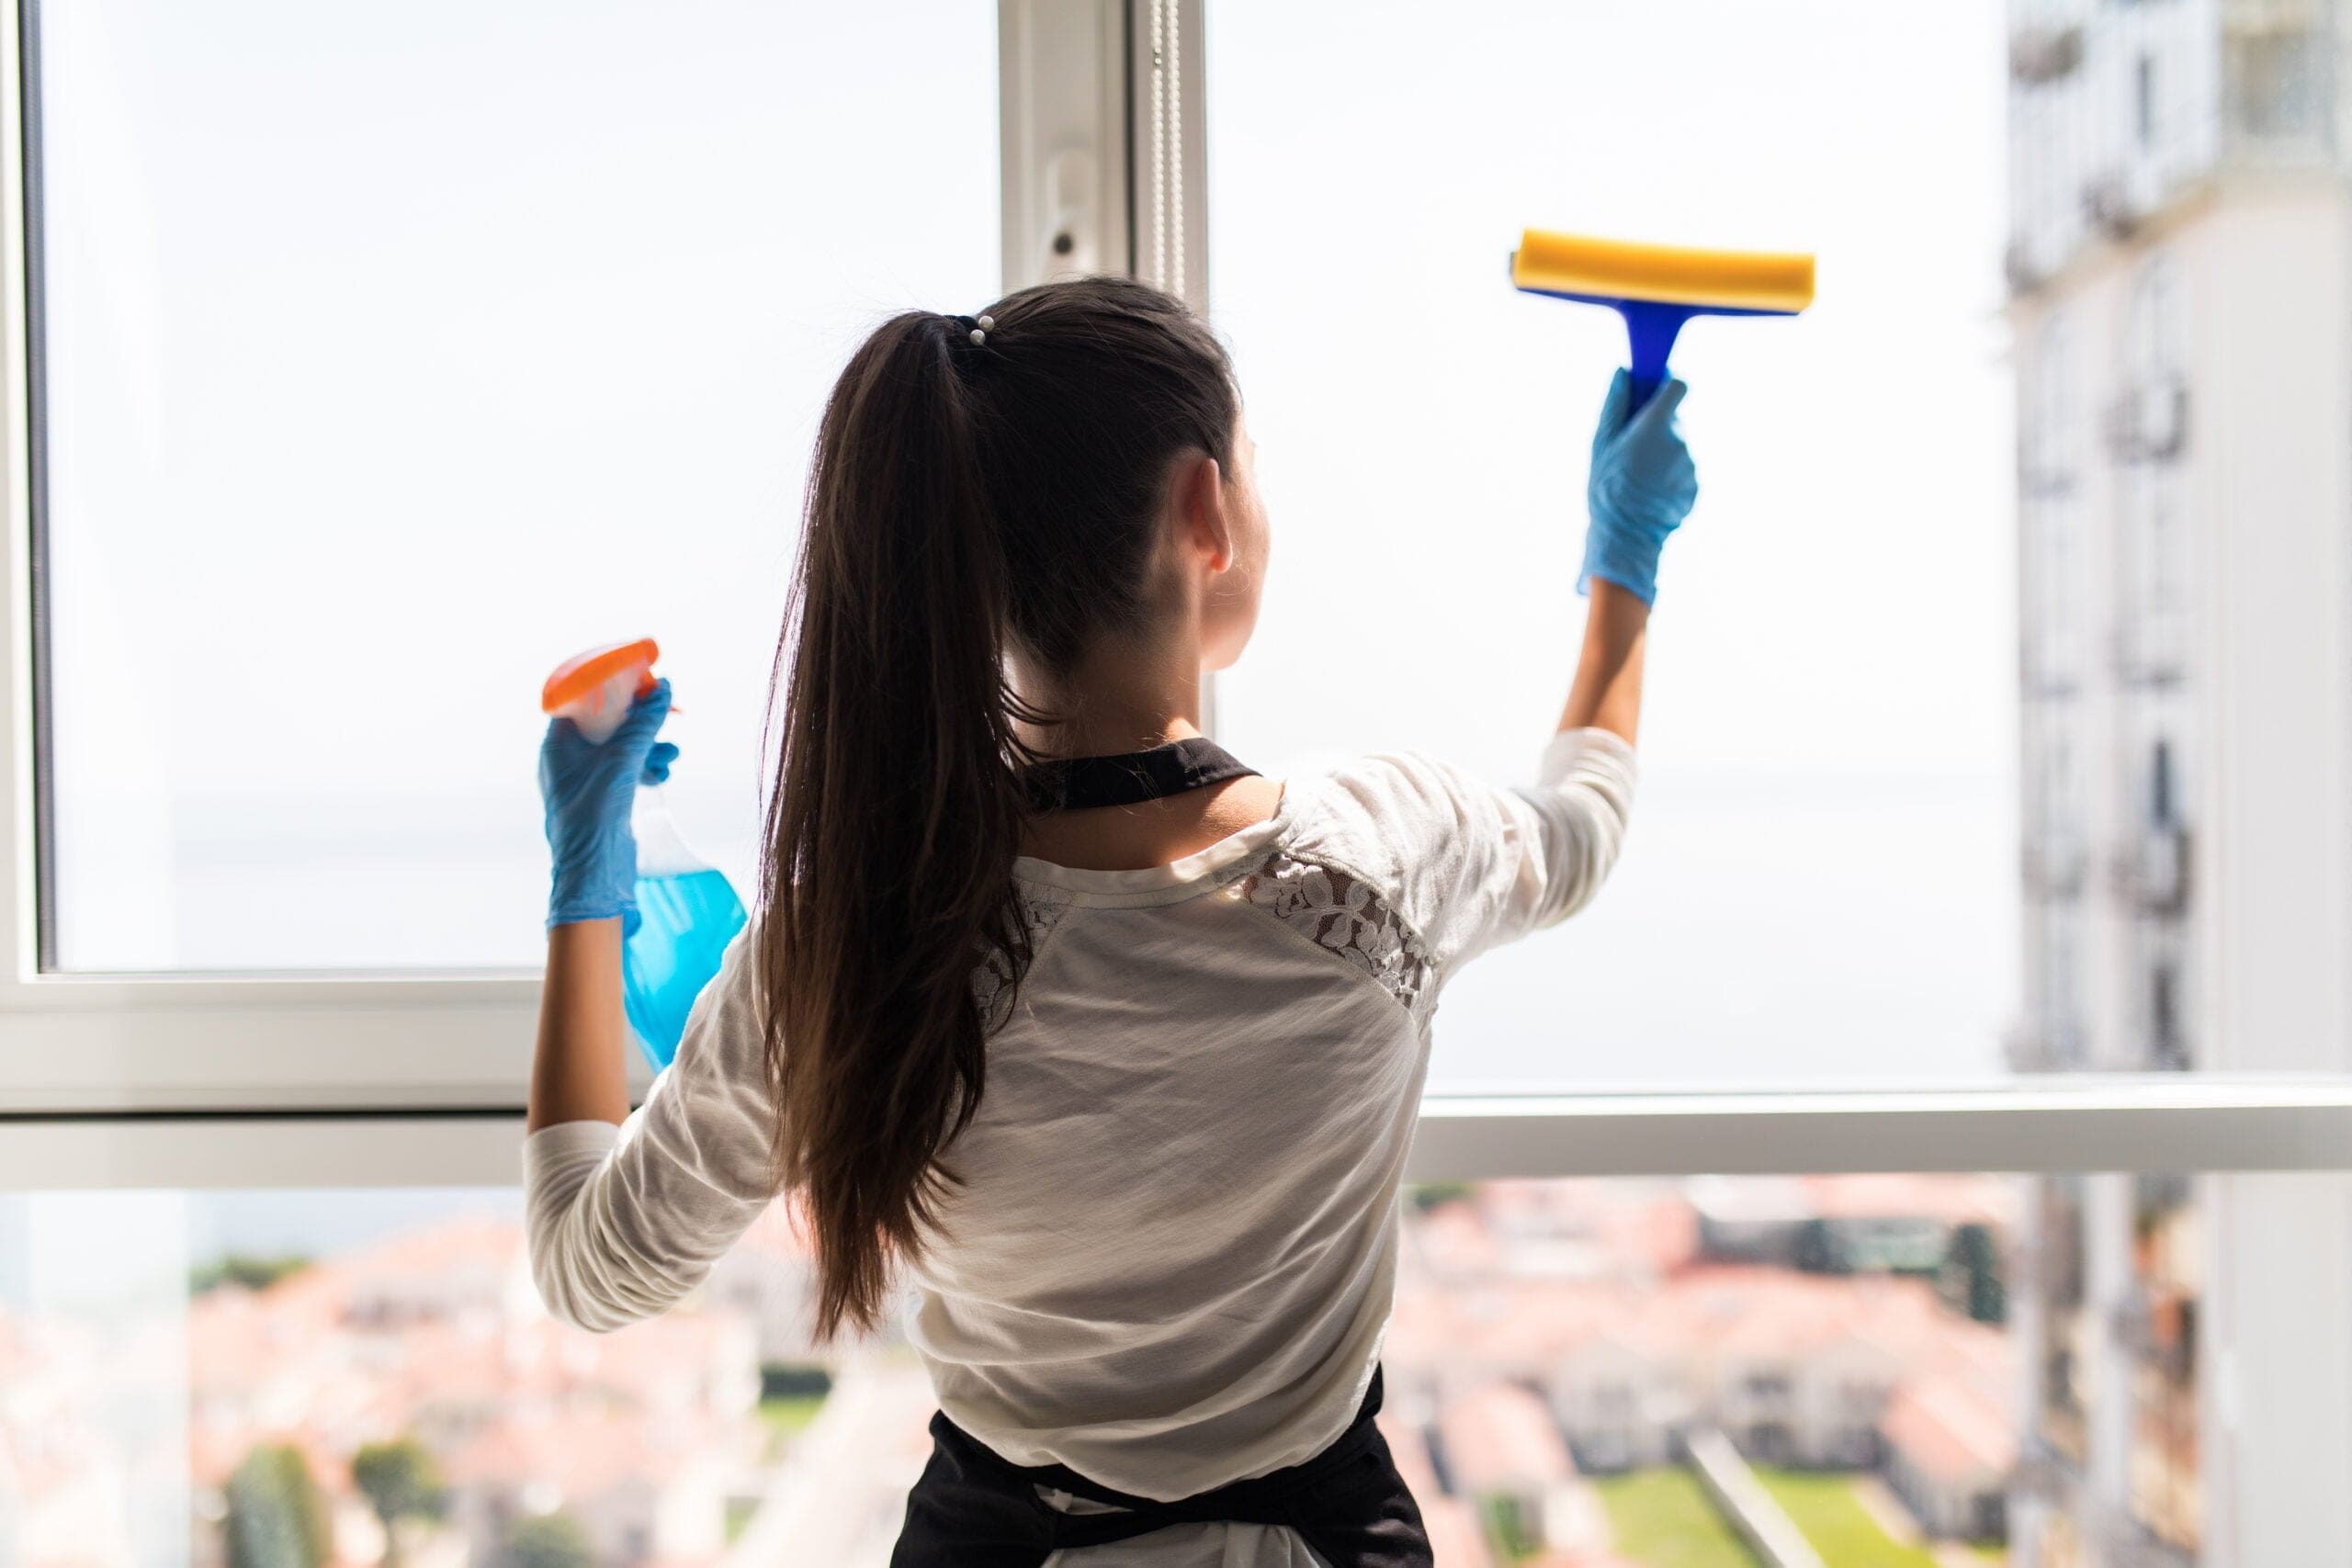 professional house cleaners cleaning windows to maximize the value of your home before selling it.